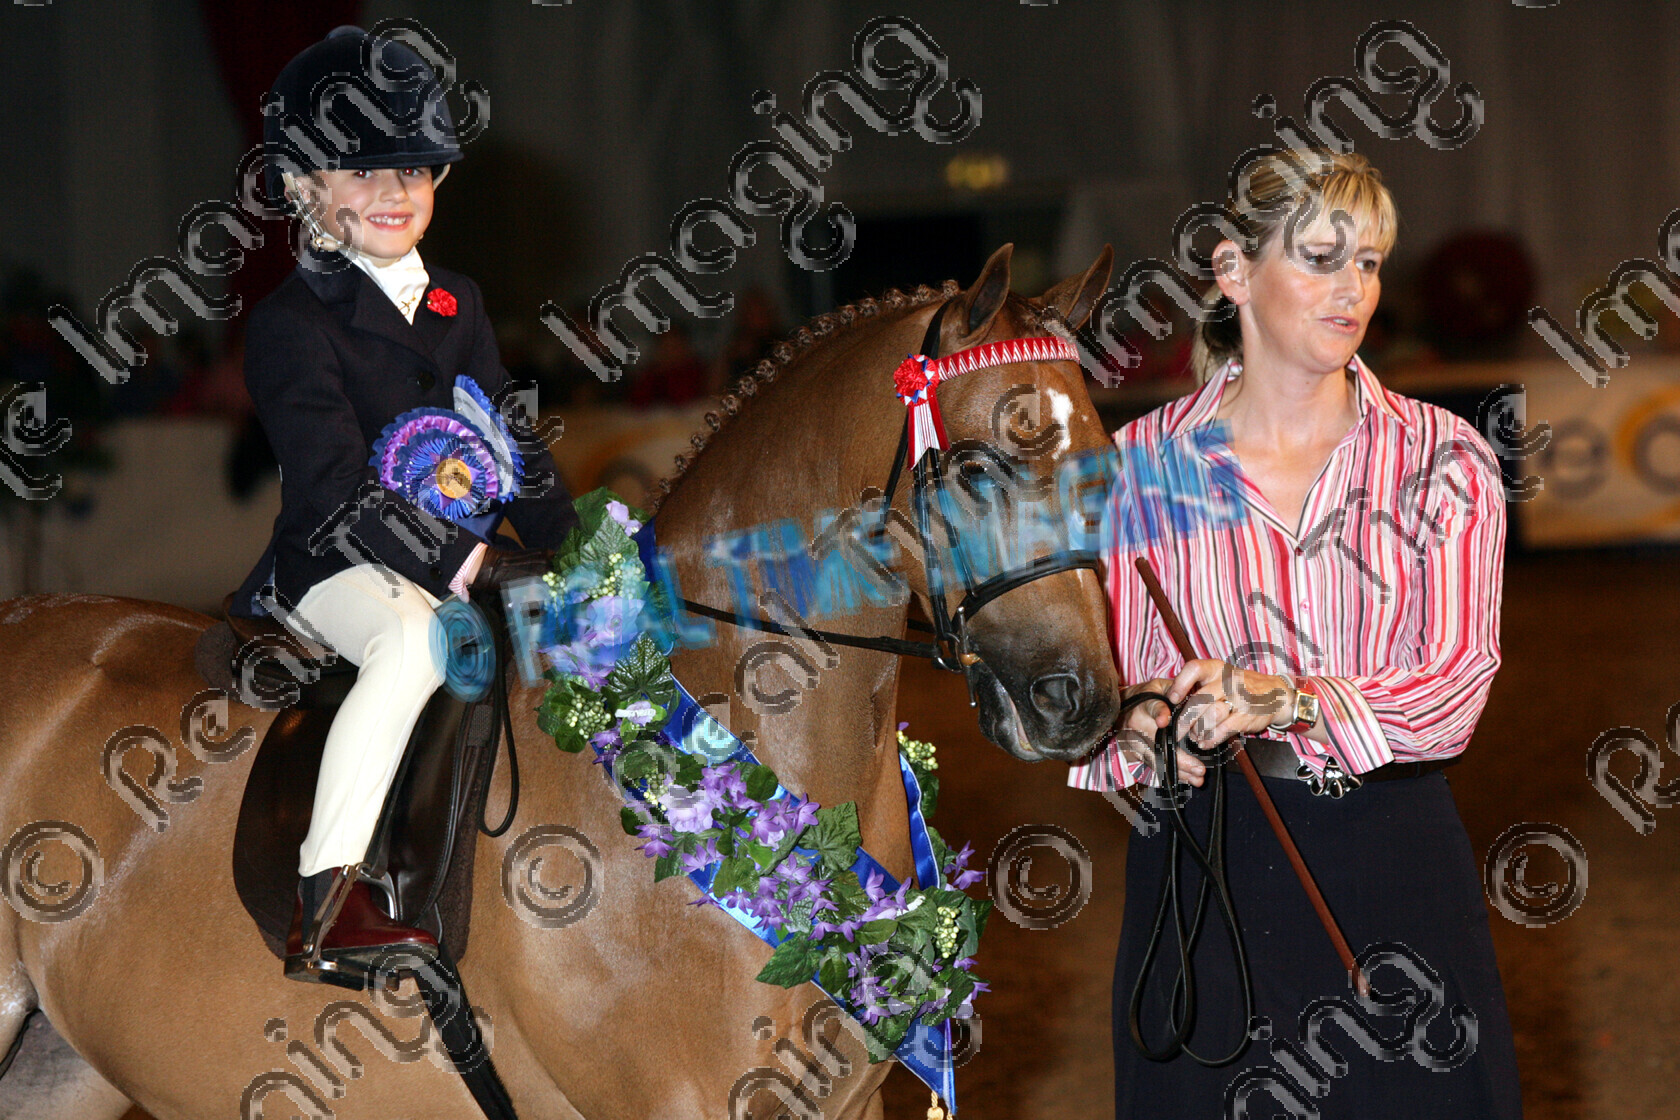 S06-54-13-035 
 Keywords: BSPS Summer Championships Show British Show Pony Society THE "BLUNDELL FAMILY SHOW TEAM" BLUE RIBAND MINI SHOW PONY OF THE YEAR
CHAMPION  OKEWOOD DELIGHTFUL chestnut lead rein presentation standing sash rosette rosettes